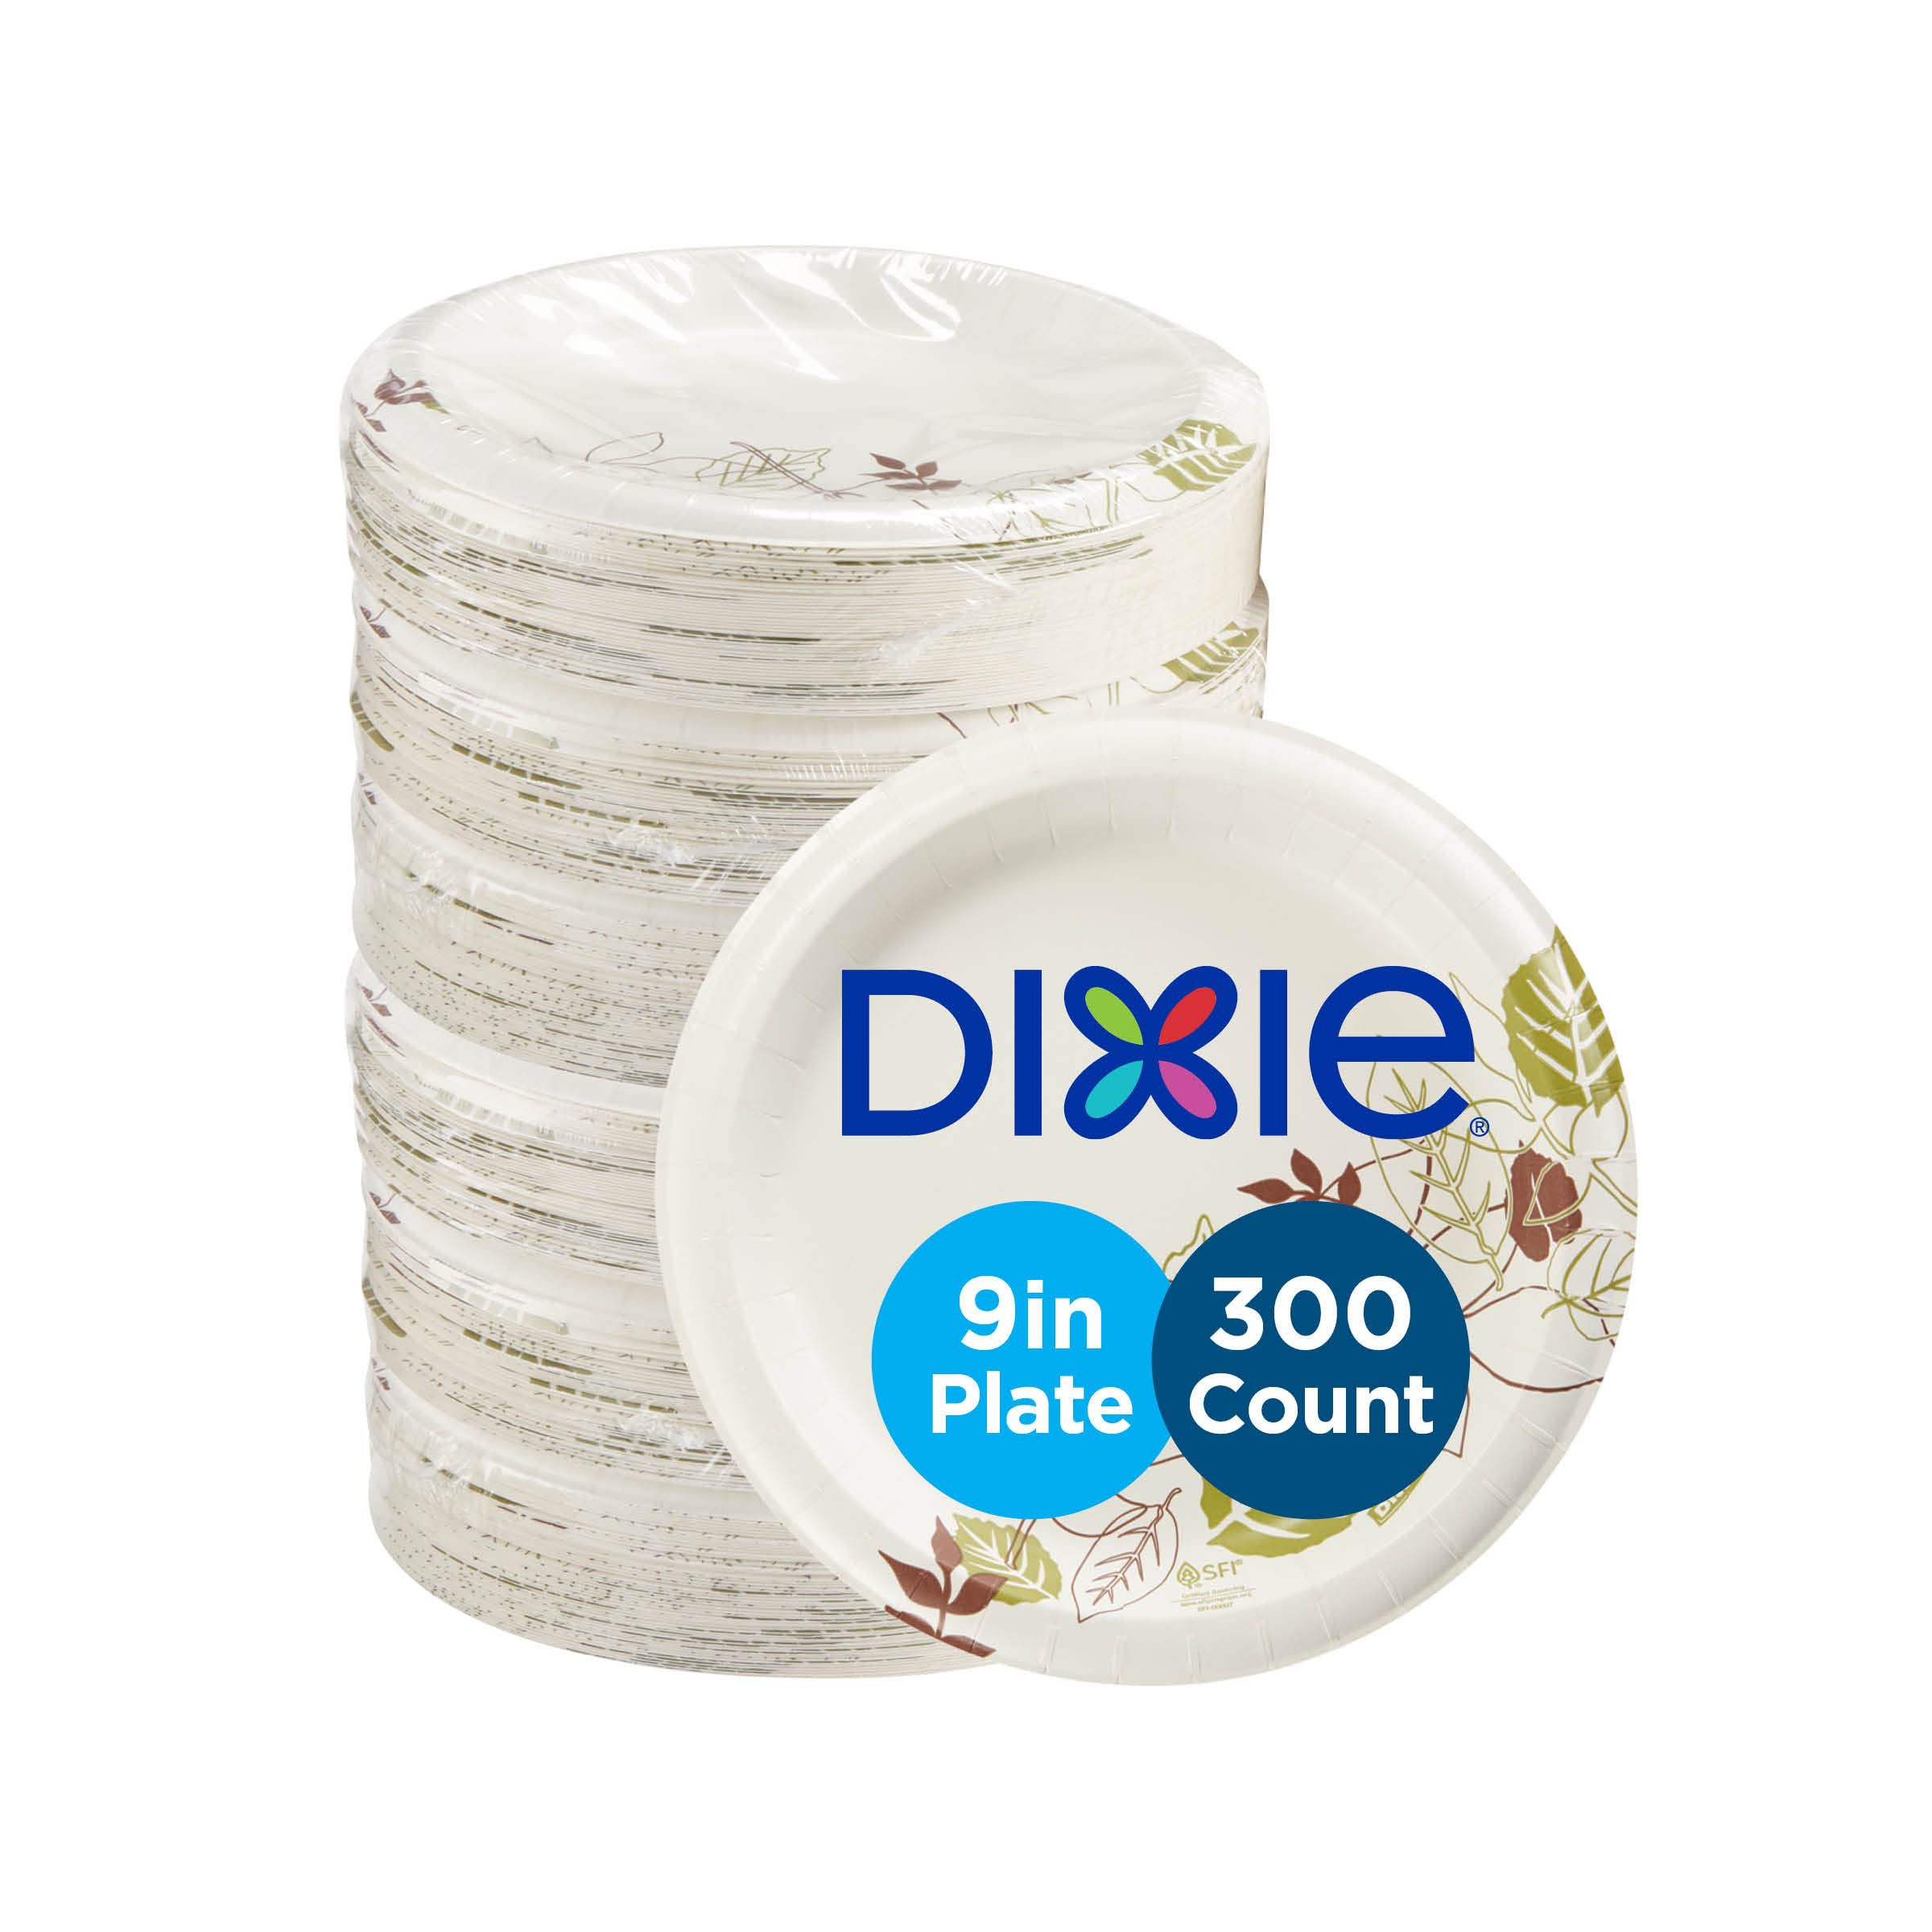 Georgia-Pacific Dixie 8.5 Medium-Weight Paper Plates by GP PRO Pathways  UX9P300 300 Count (50 Plates Per Pack 6 Sleeves Per Case)